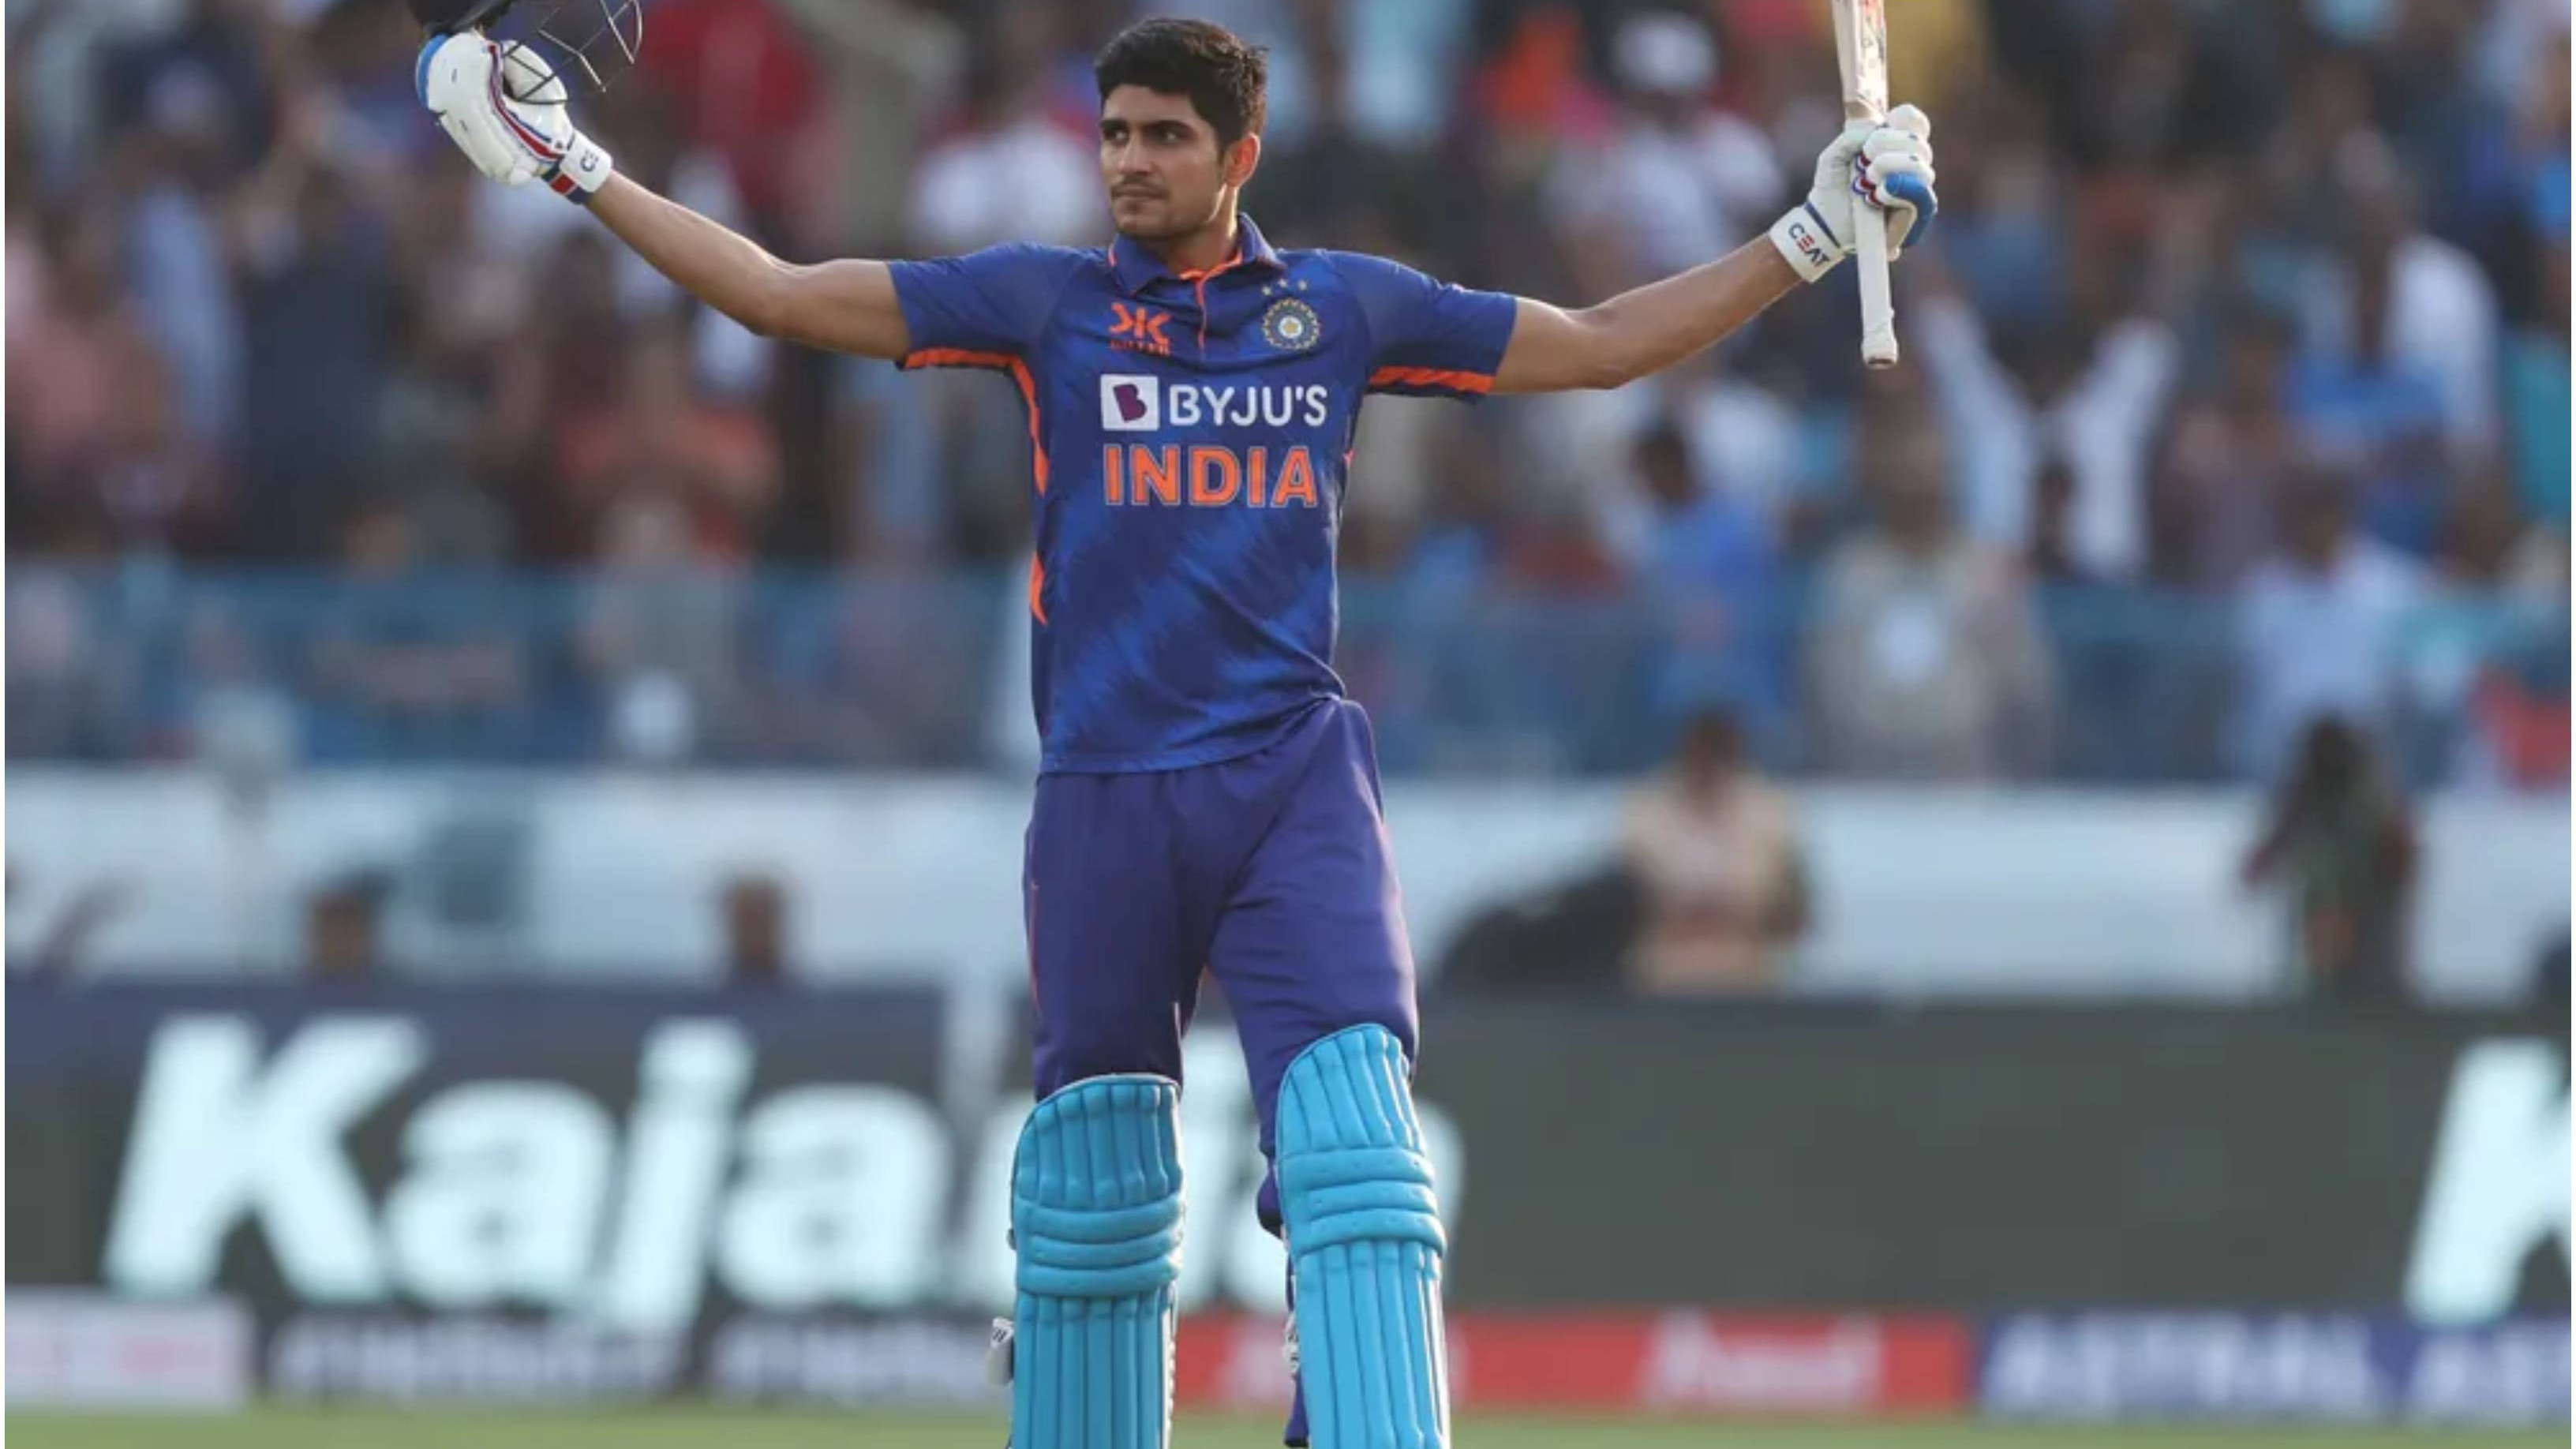 IND v NZ 2023: “I wanted to unleash…” says Shubman Gill after his match-winning double ton in 1st ODI